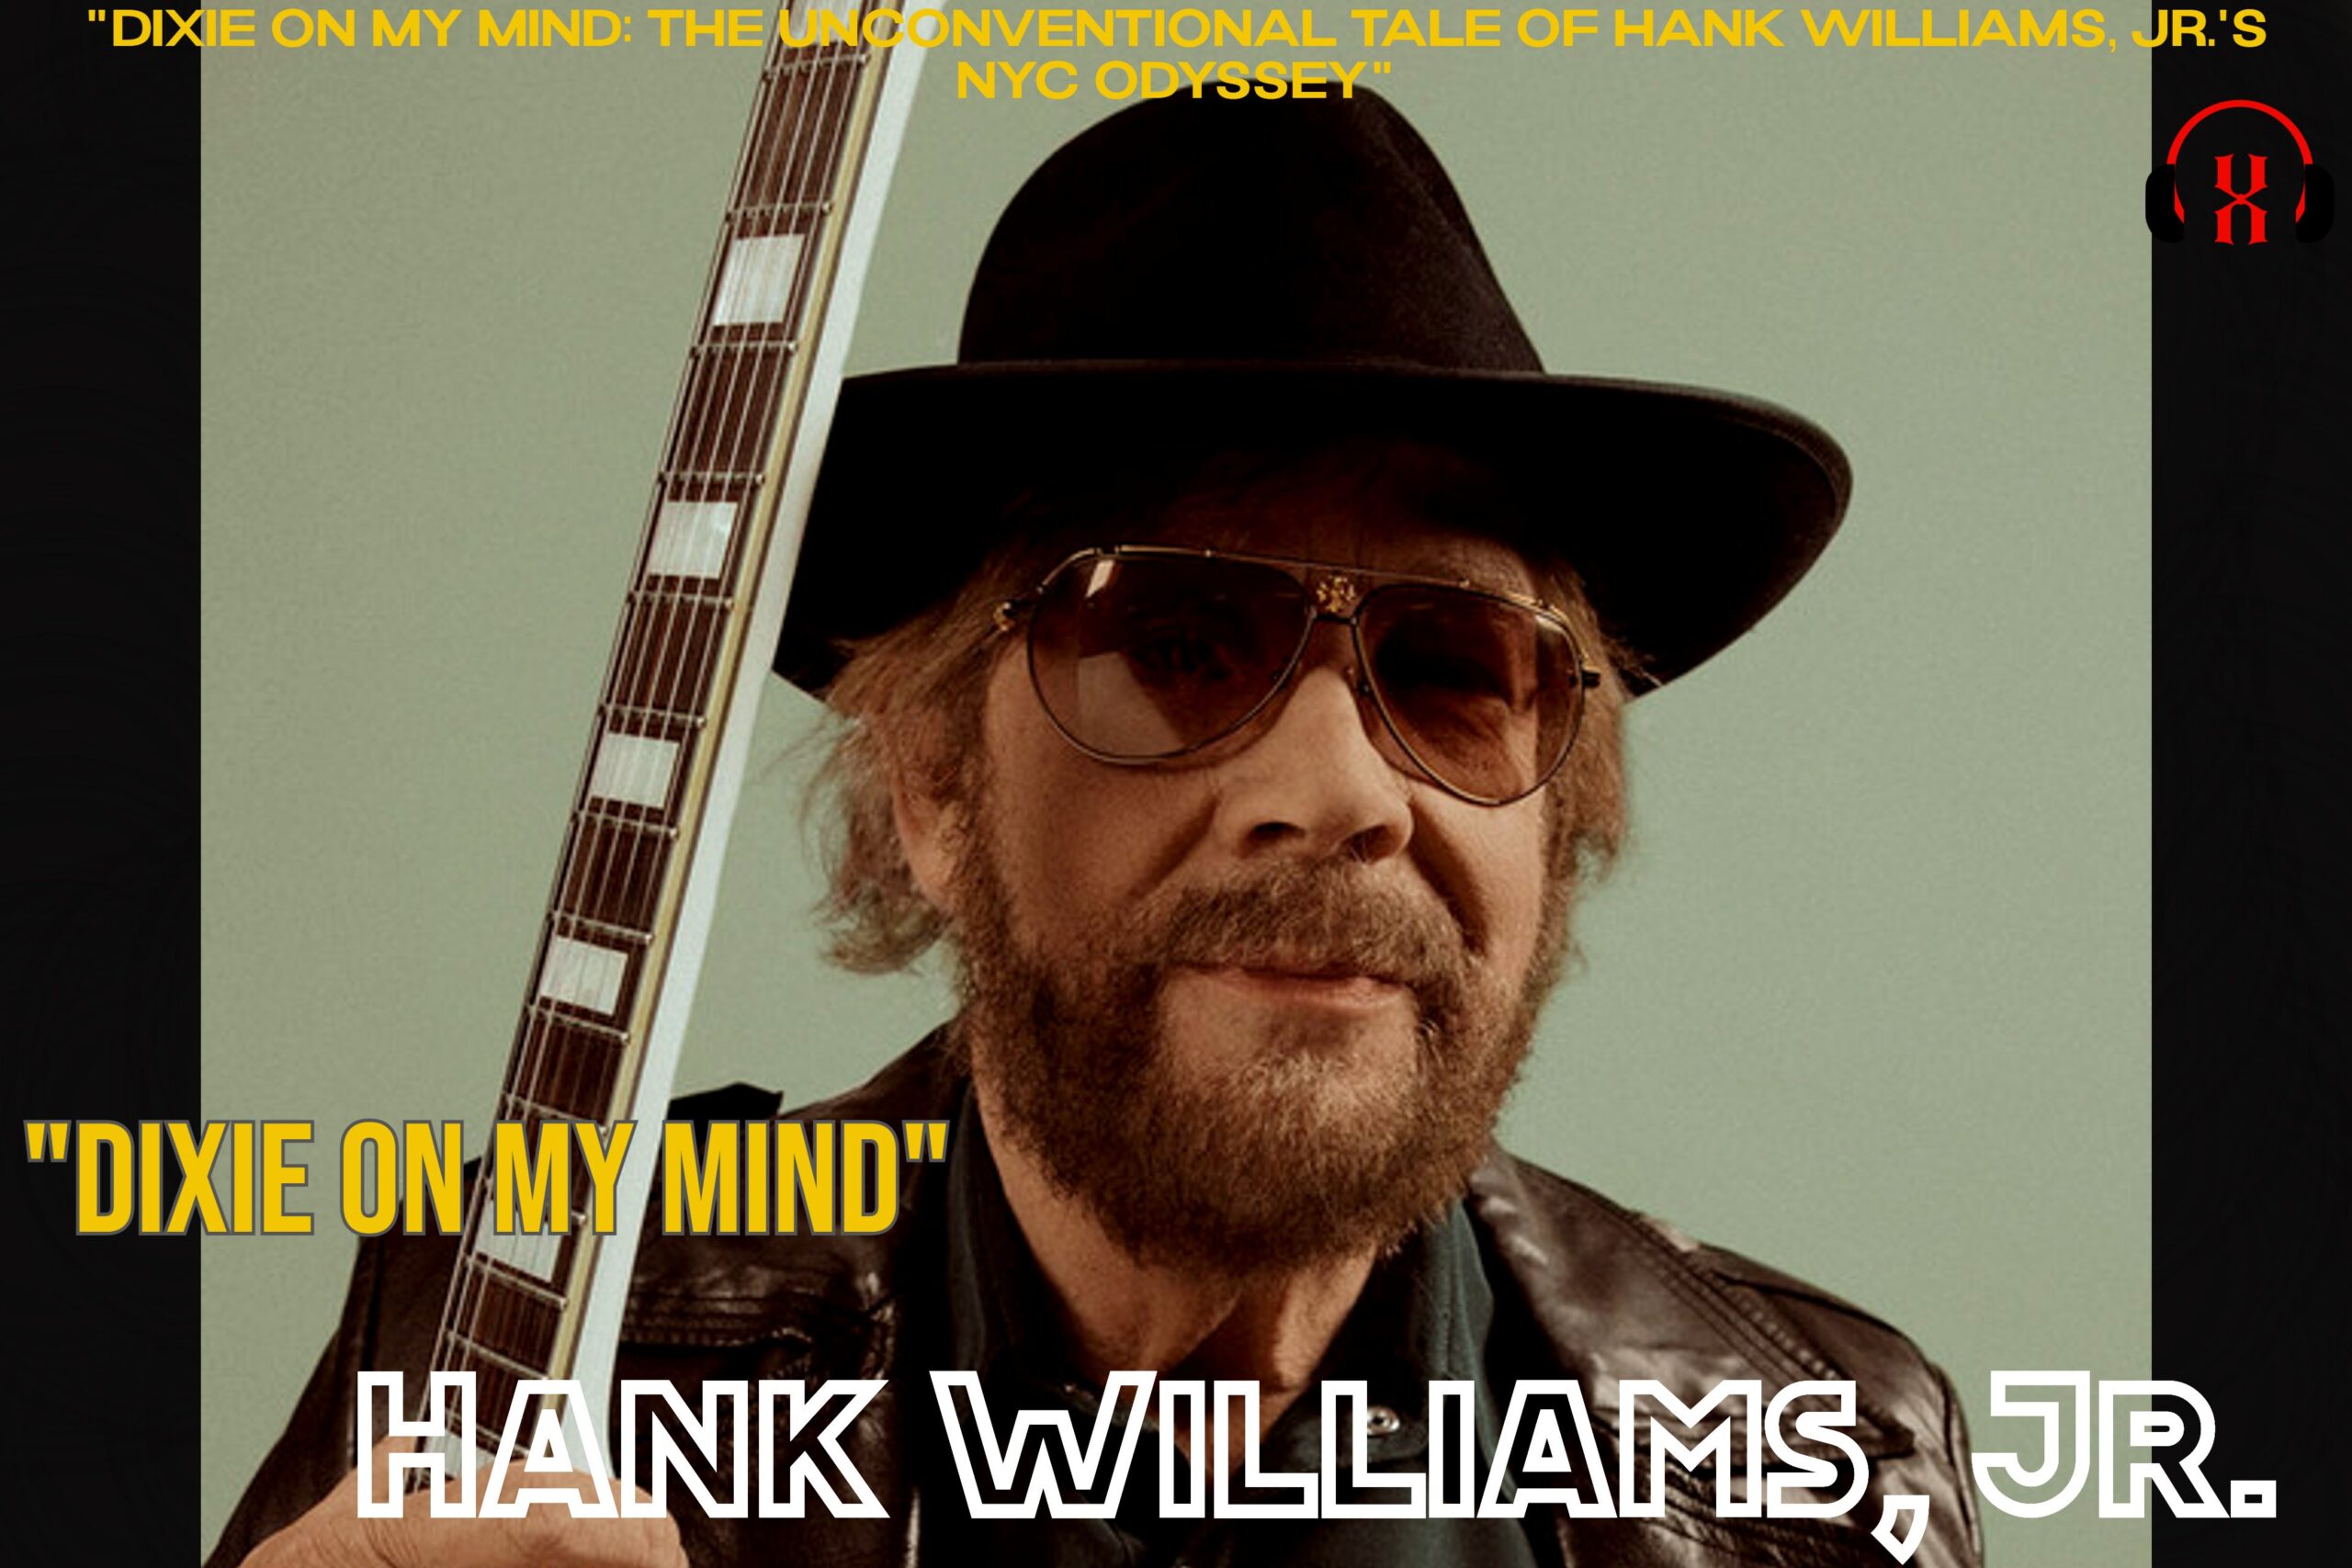 "Dixie on My Mind: The Unconventional Tale of Hank Williams, Jr.'s NYC Odyssey"